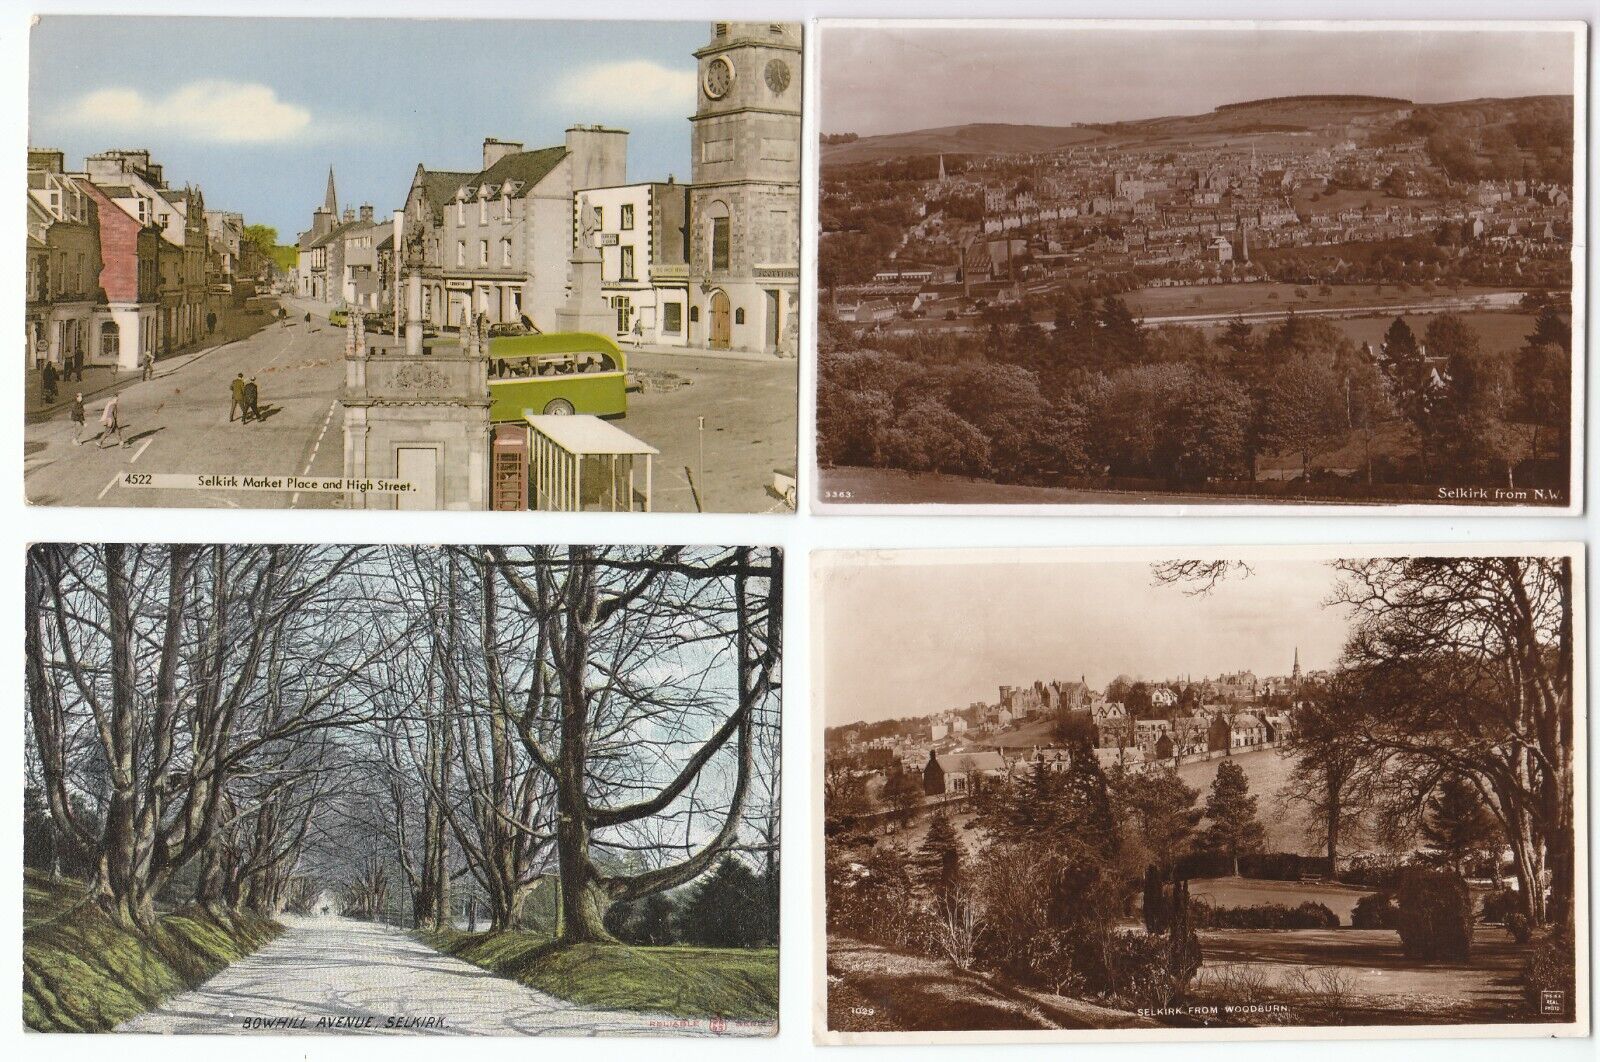 House Clearance - 10 Selkirk Selkirkshire Scotland Scottish Old Services All Cards Shown (P8)